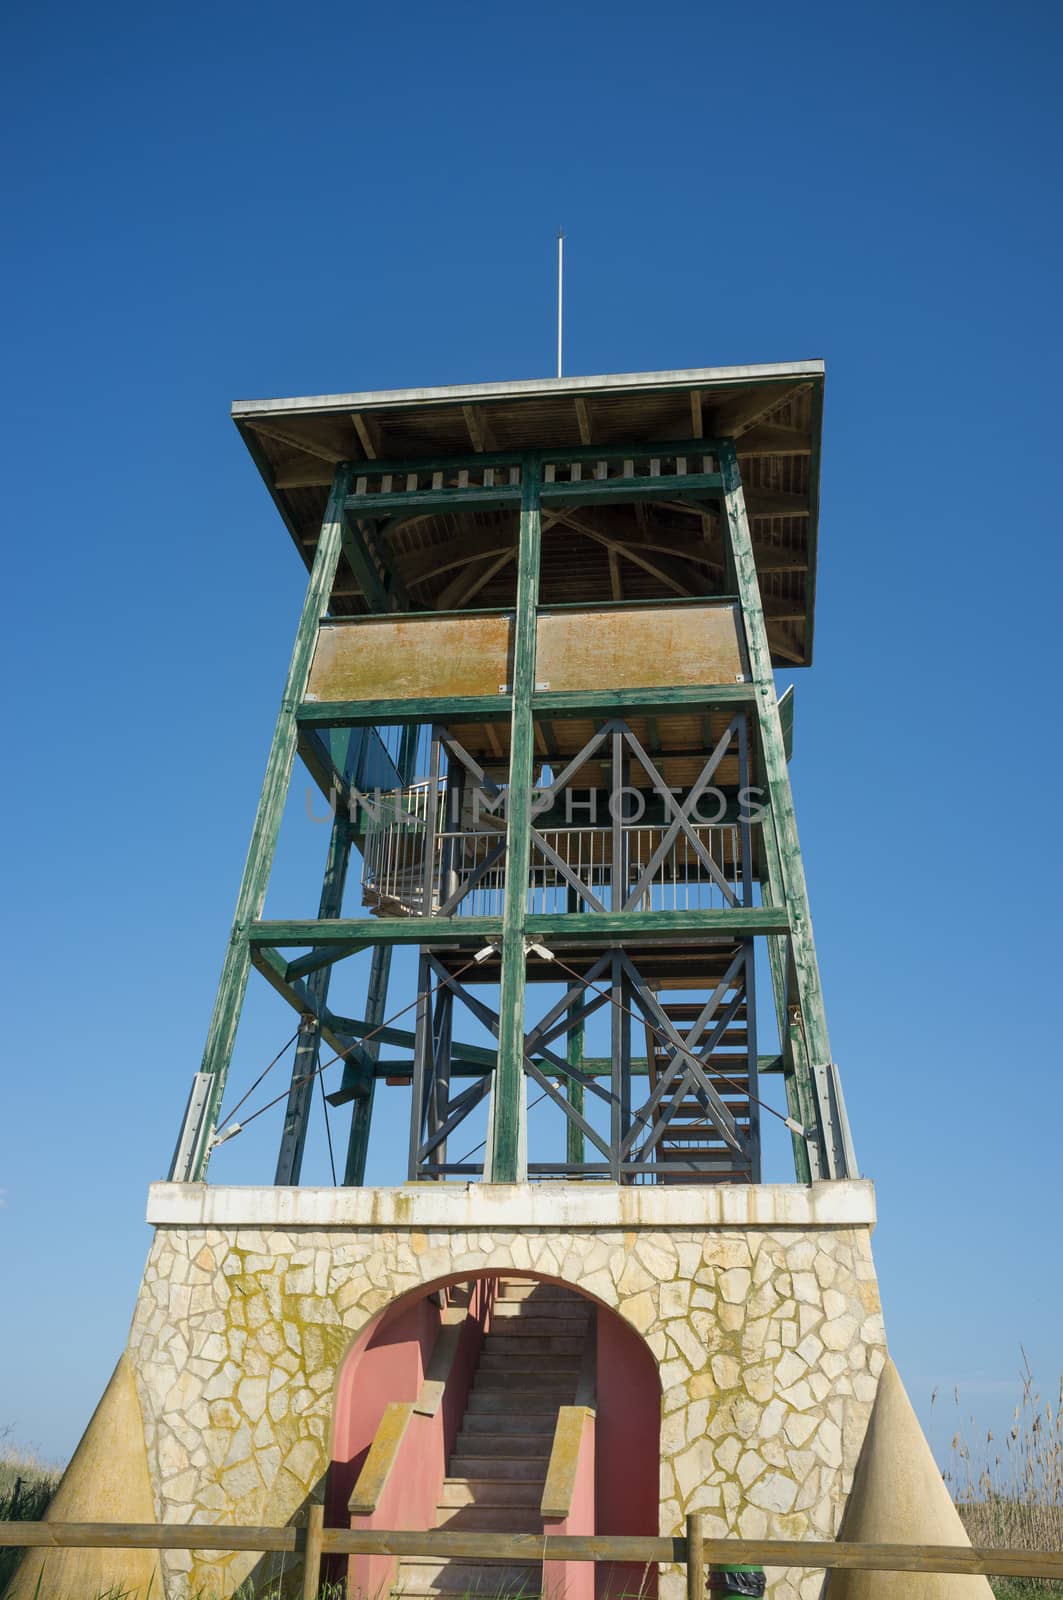 Watchtower meant for wildlife observation in a natural park